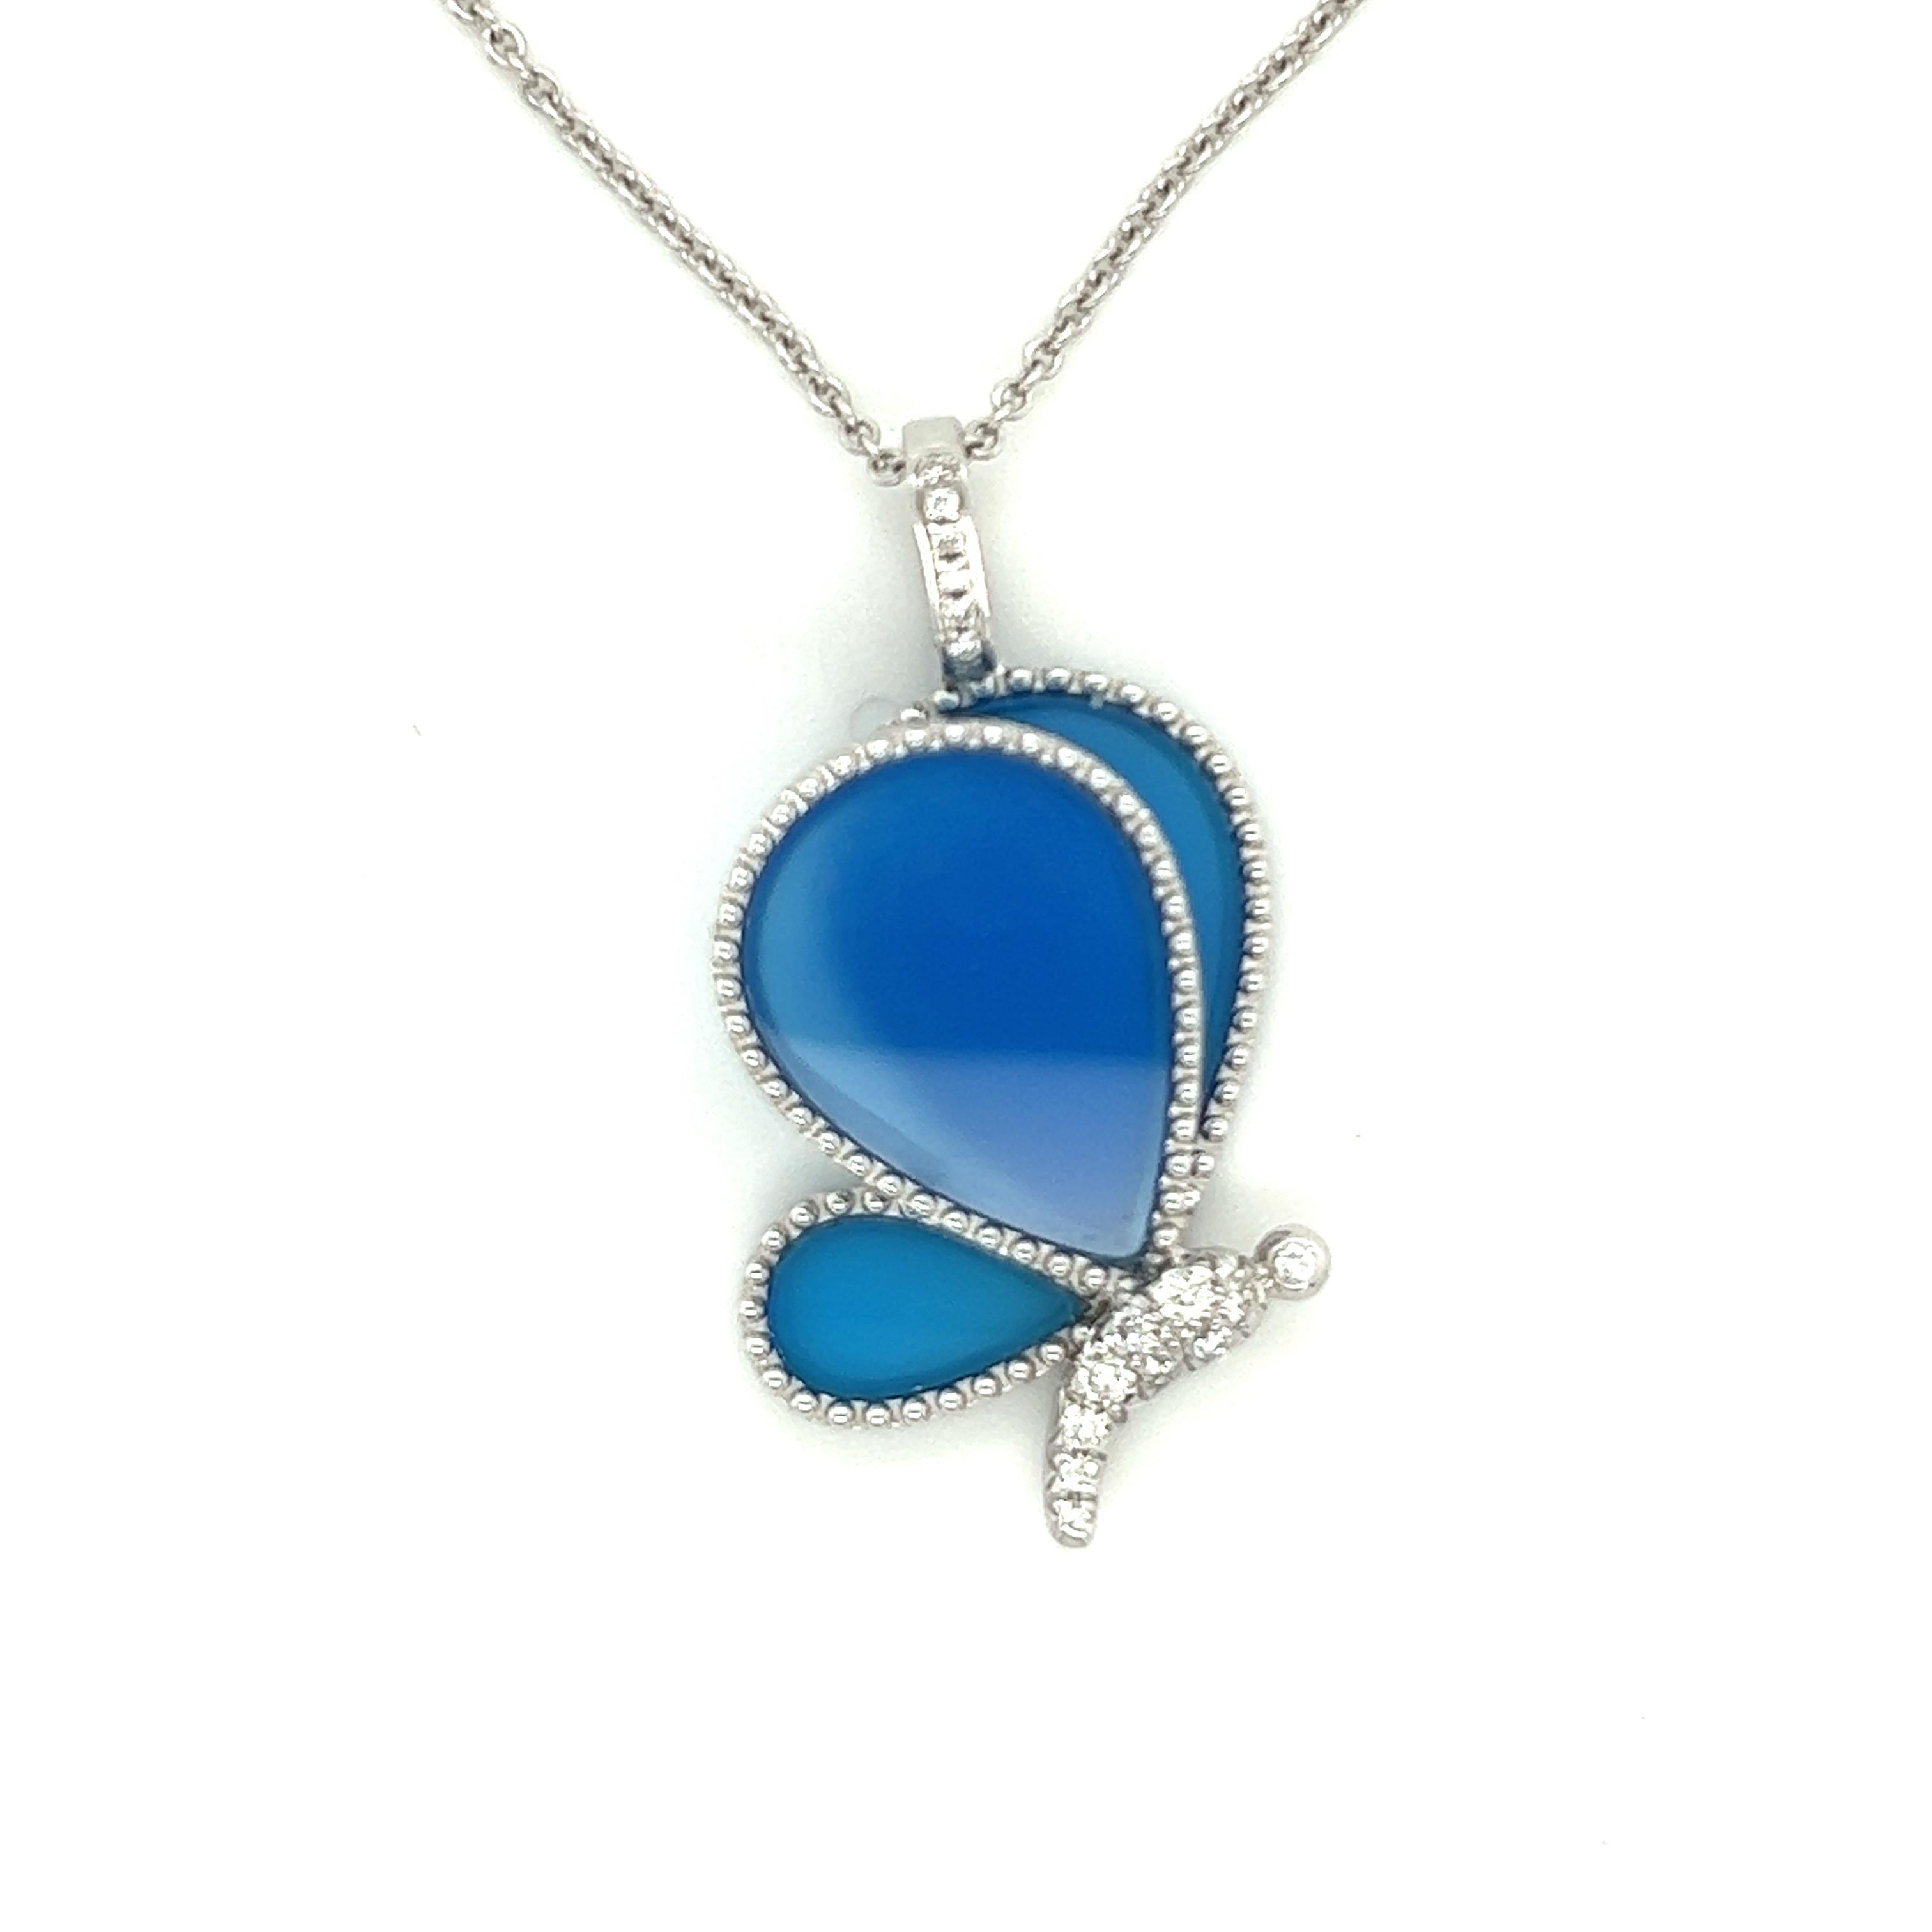 Butterfly Blue Agate 18K White Gold Necklace

3 Blue Agates 5.40CT
17 Diamonds 0.18CT
18K White Gold 7.76 GM

Blue agate crystal offers its bearers 'emotional facelifts'. The stone is used as a means of healing and building strong emotional health